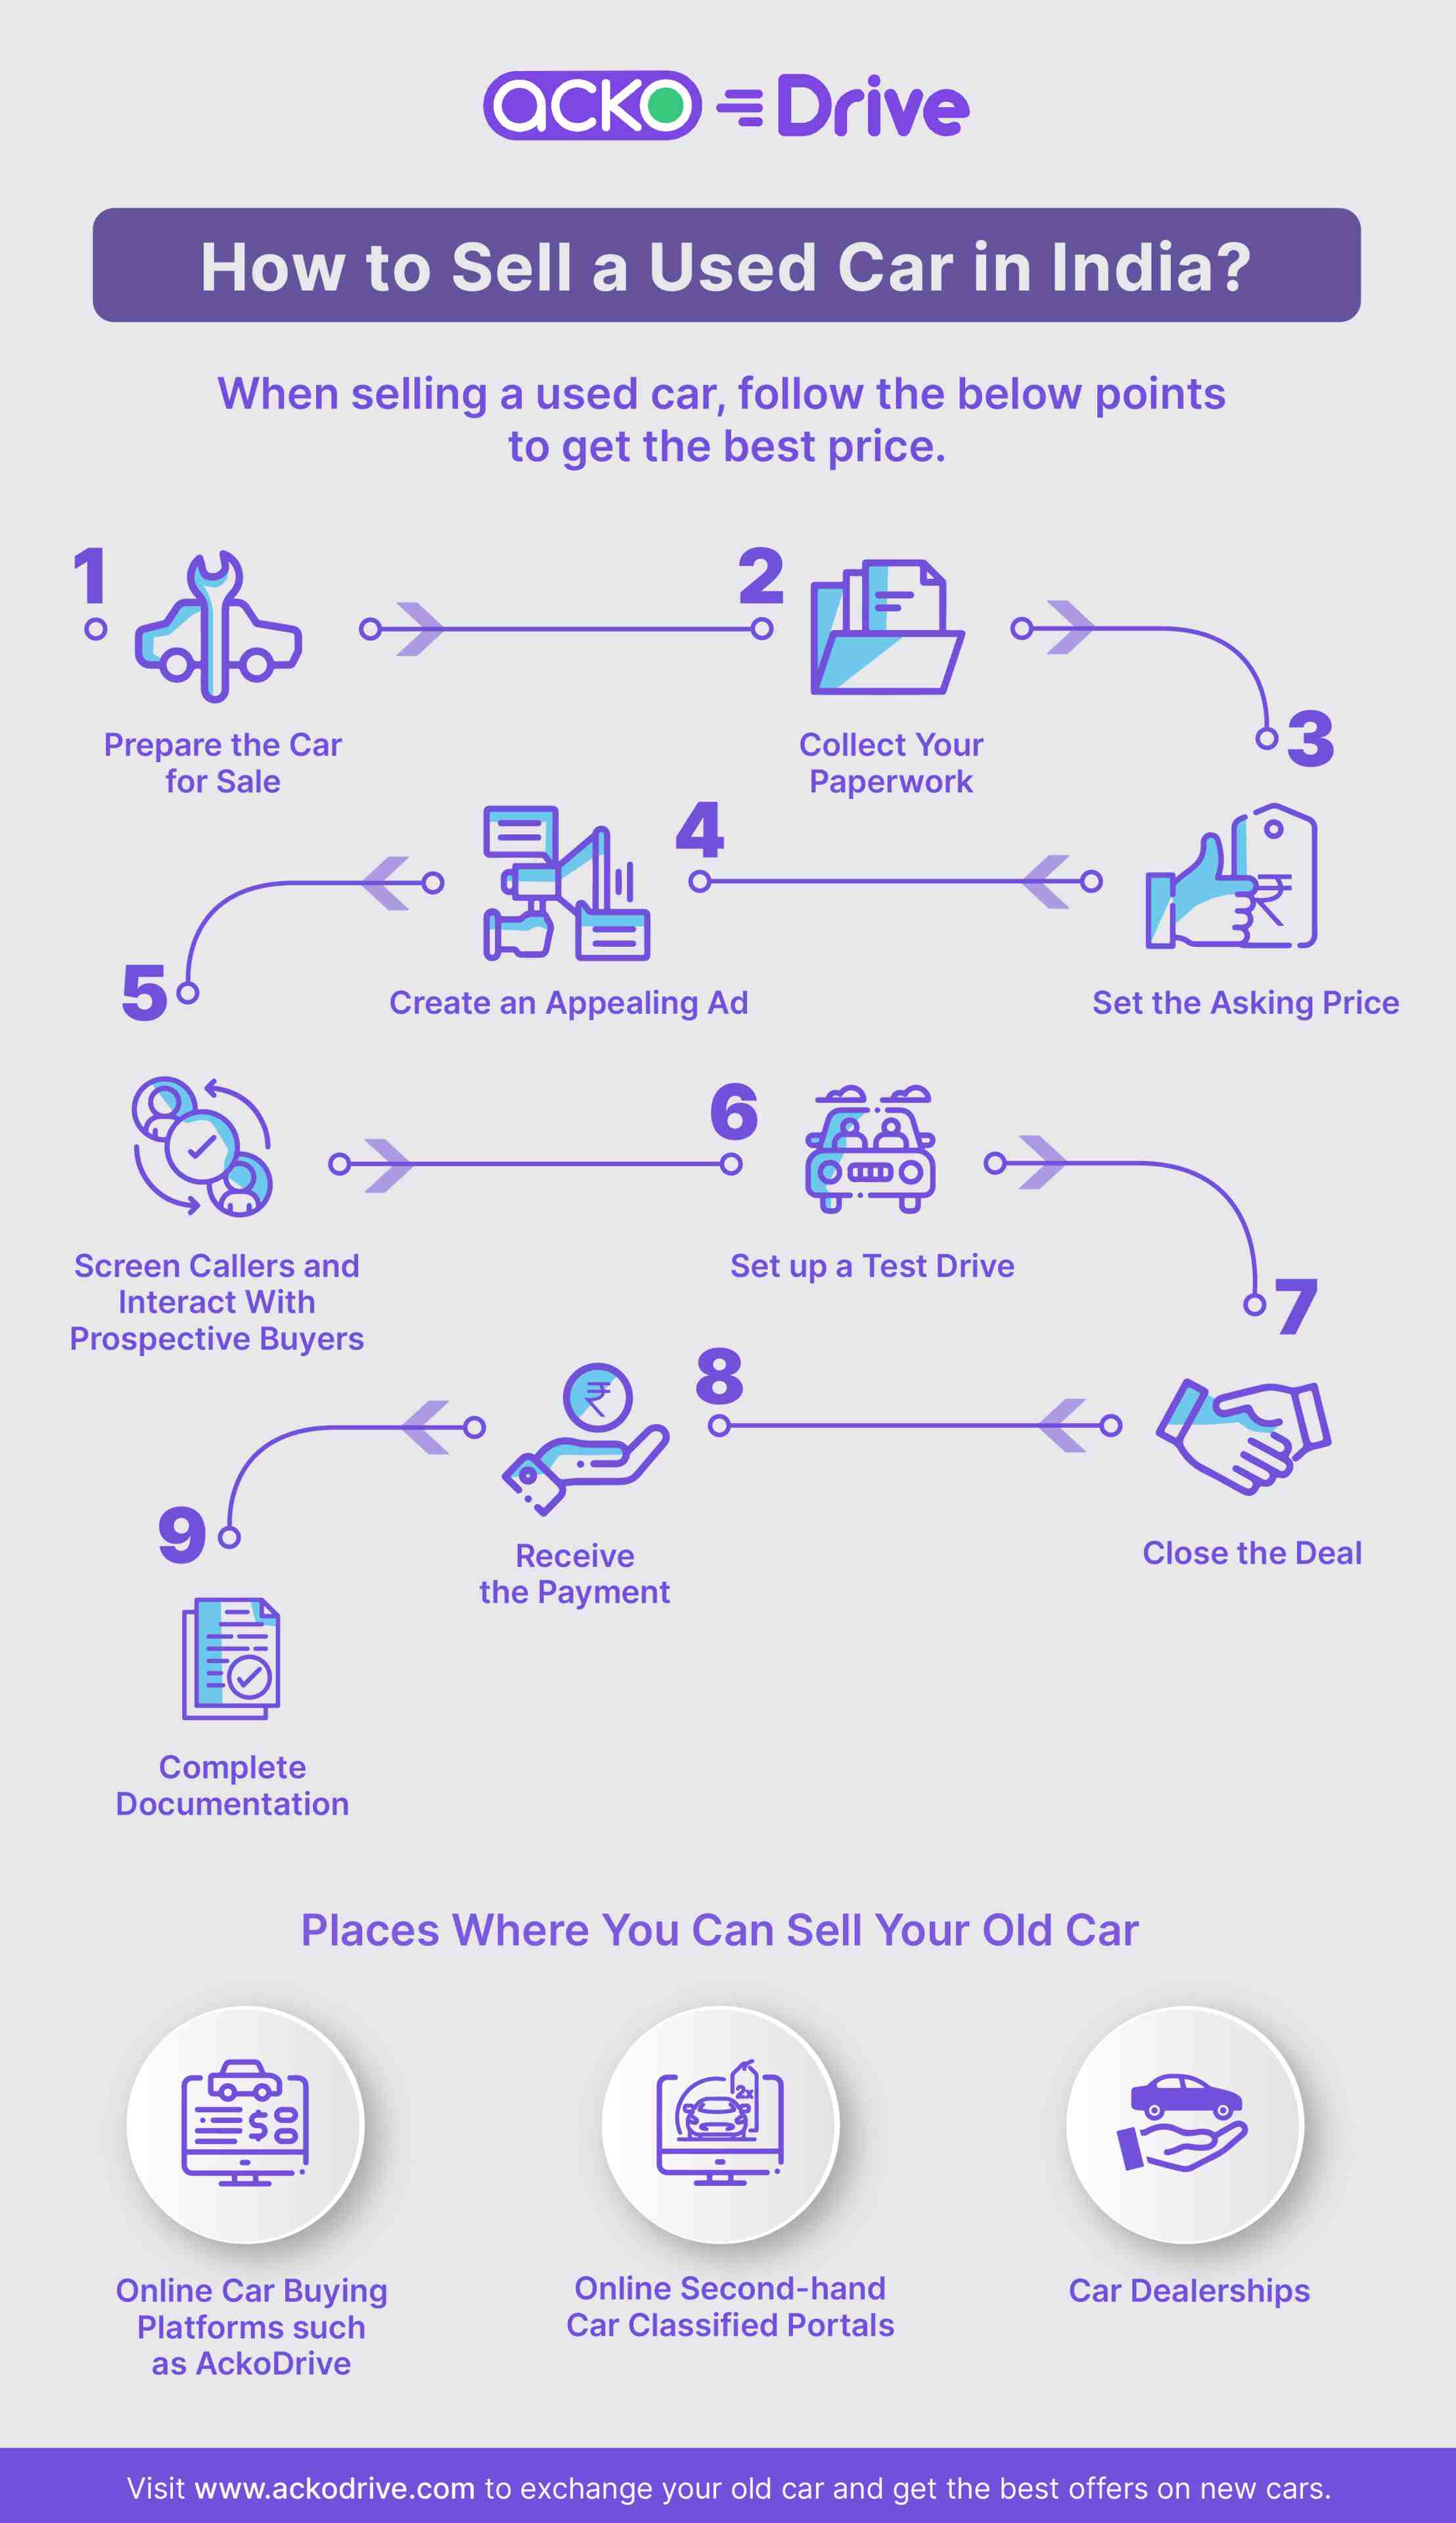 How to Sell a Used Car in India? StepbyStep Process